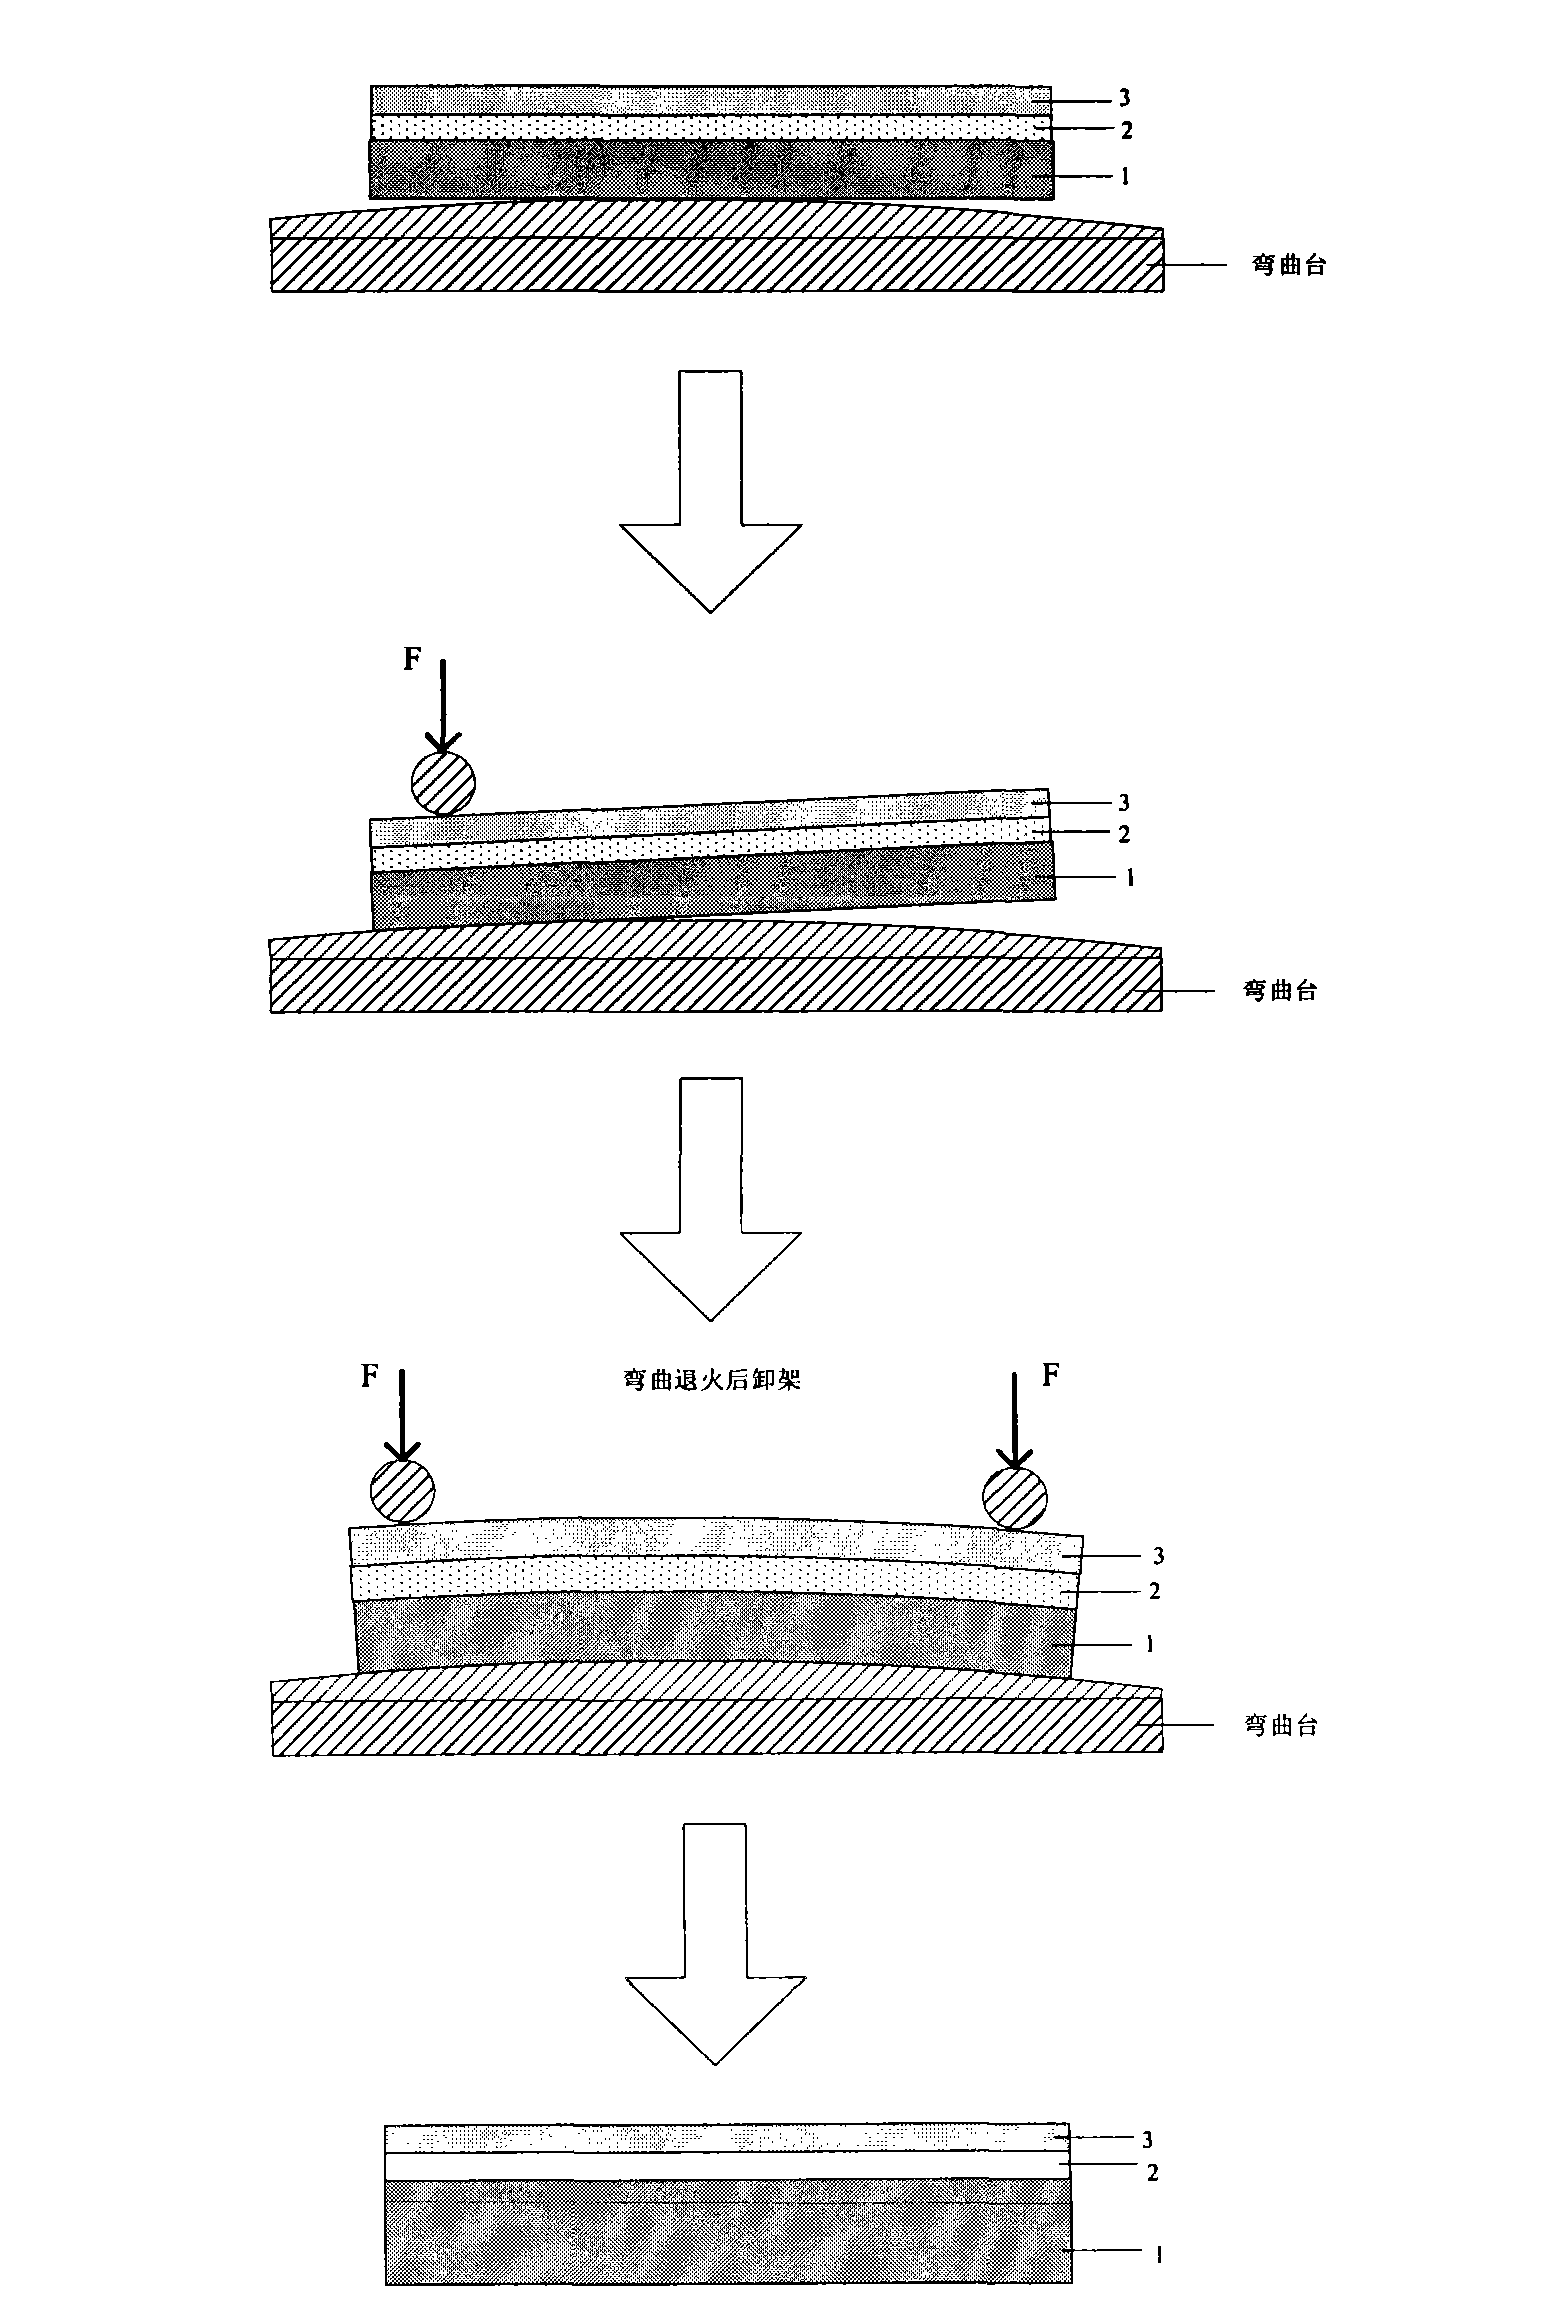 Manufacturing method of mechanical uniaxial strain SOI (silicon-on-insulator) wafer